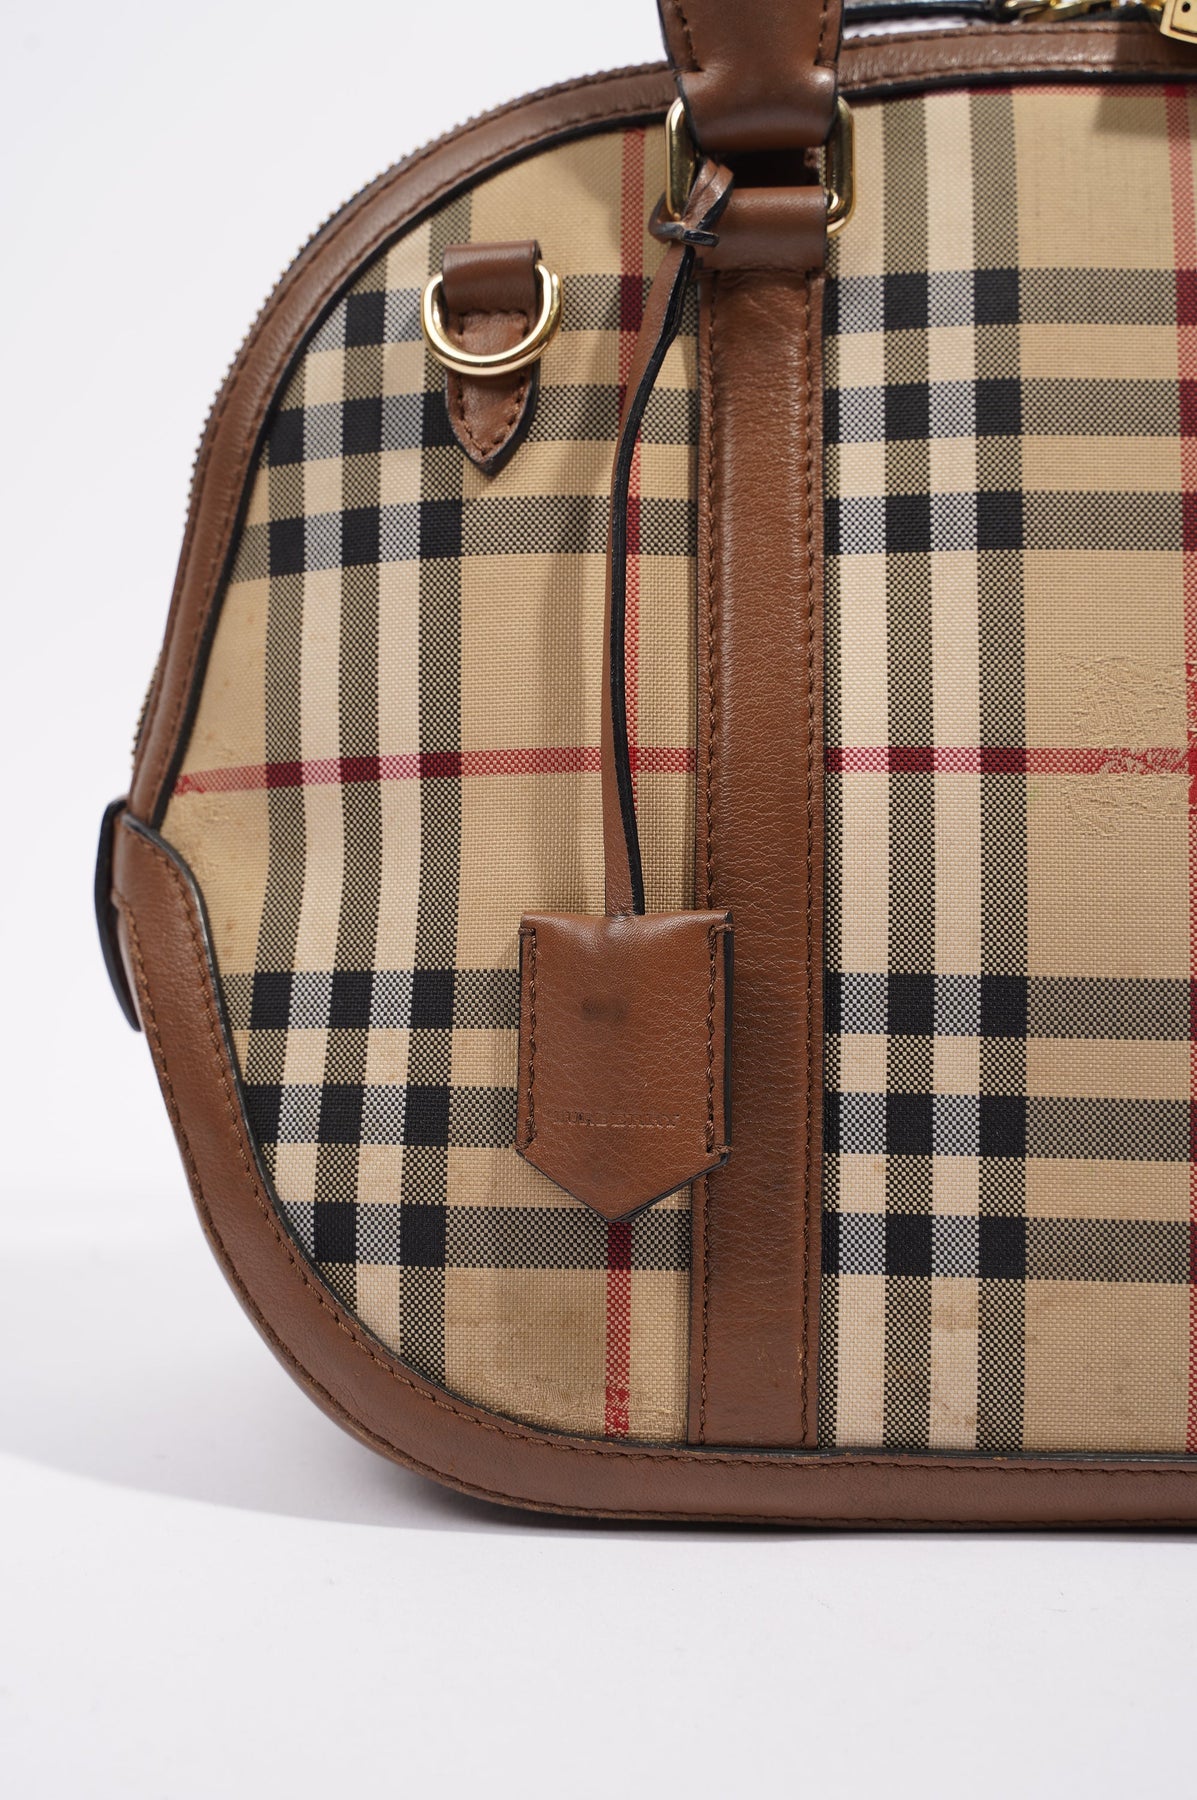 Burberry Haymarket Check Small Orchard Bowling Bag w/ Tags - Brown